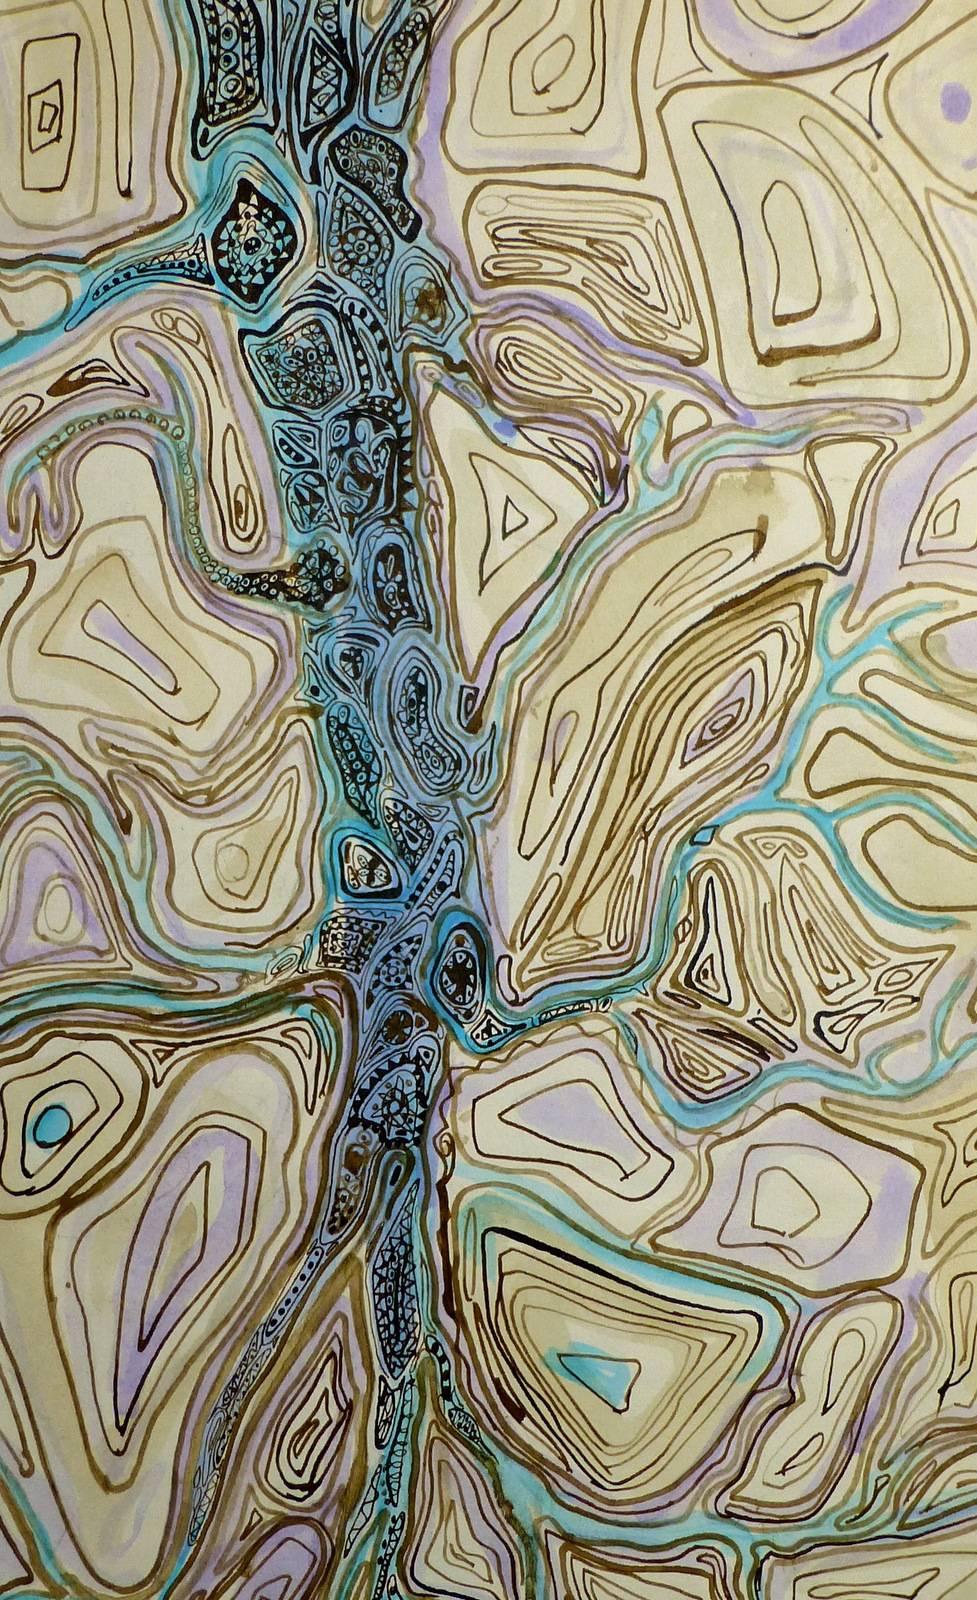 Abstract Tree - Art by Unknown